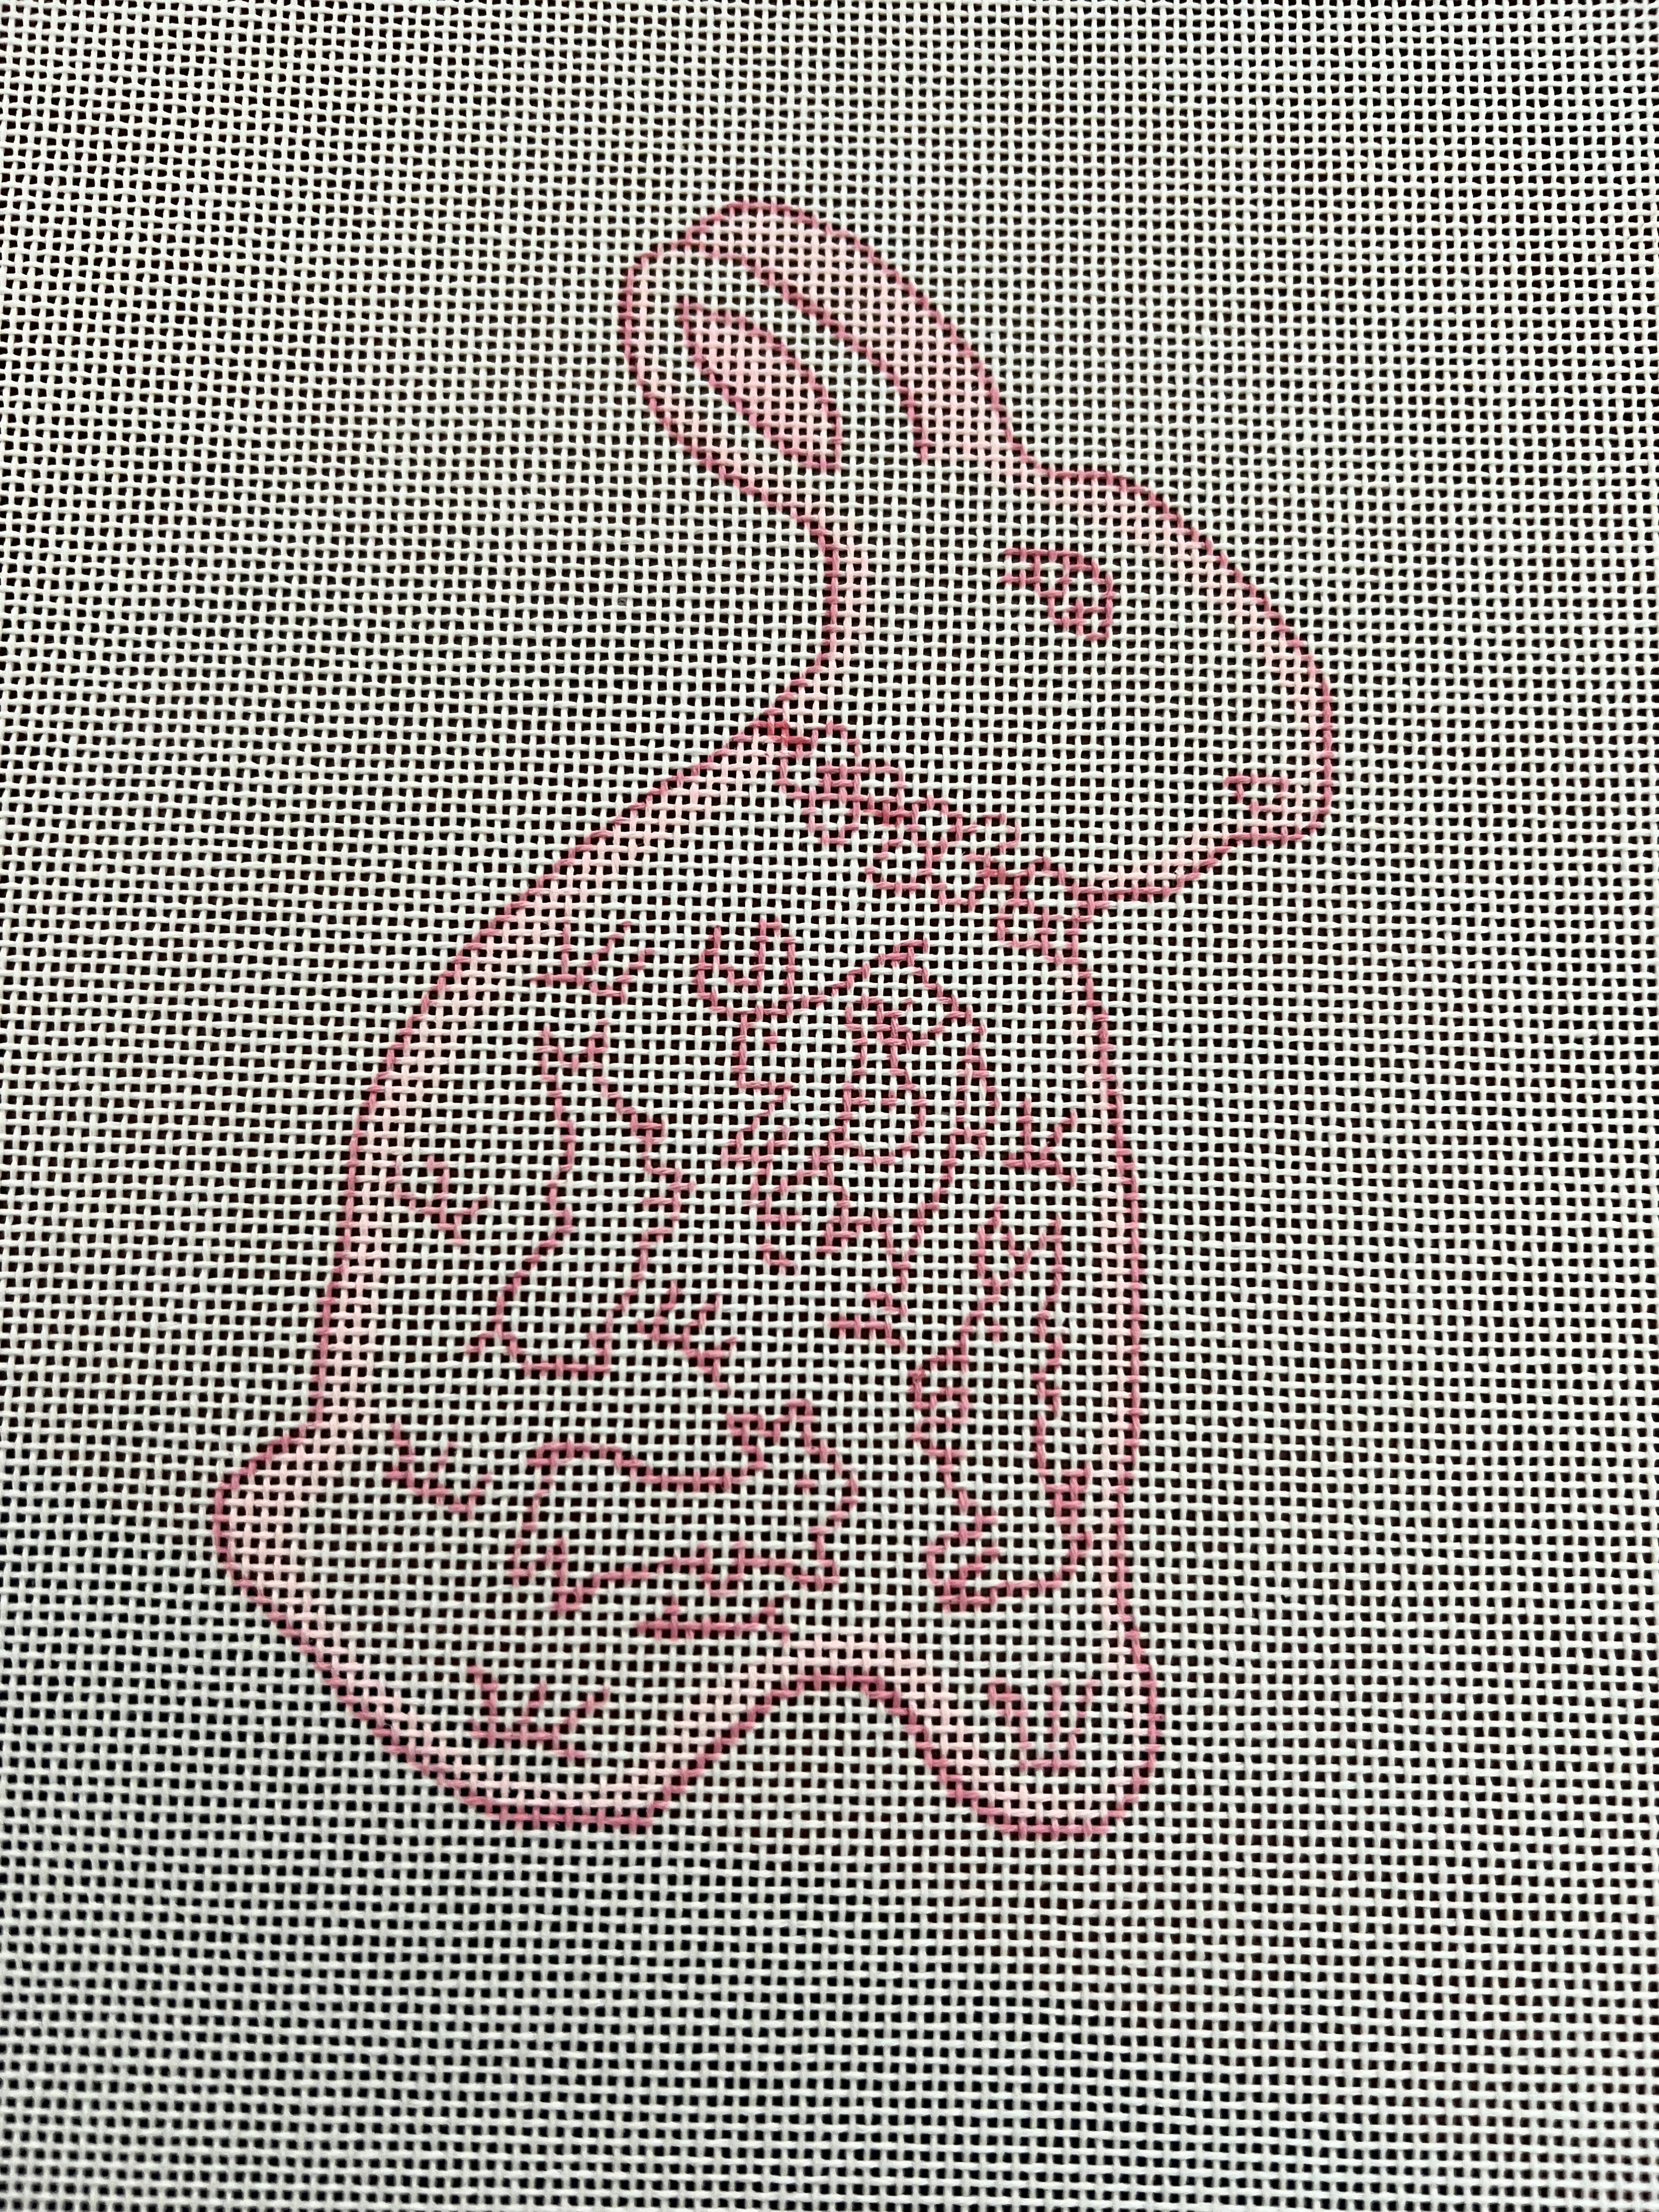 Small Pink Hare Outline